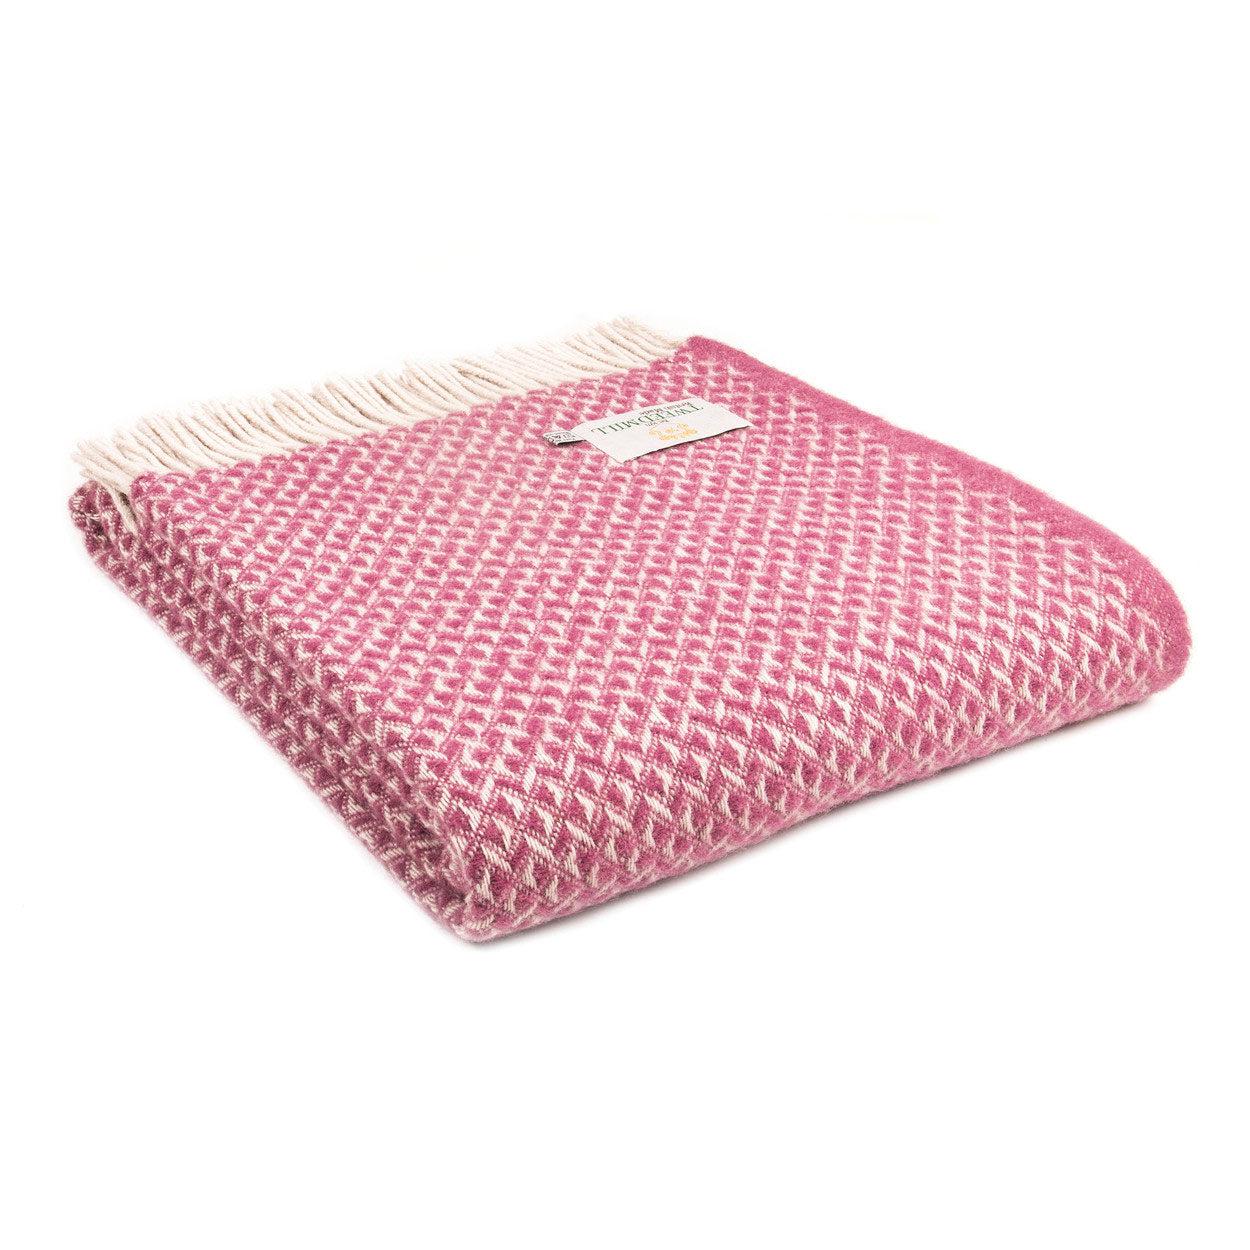 Throw / Blanket - New Wool - Welsh Diamond - Mulberry Pink